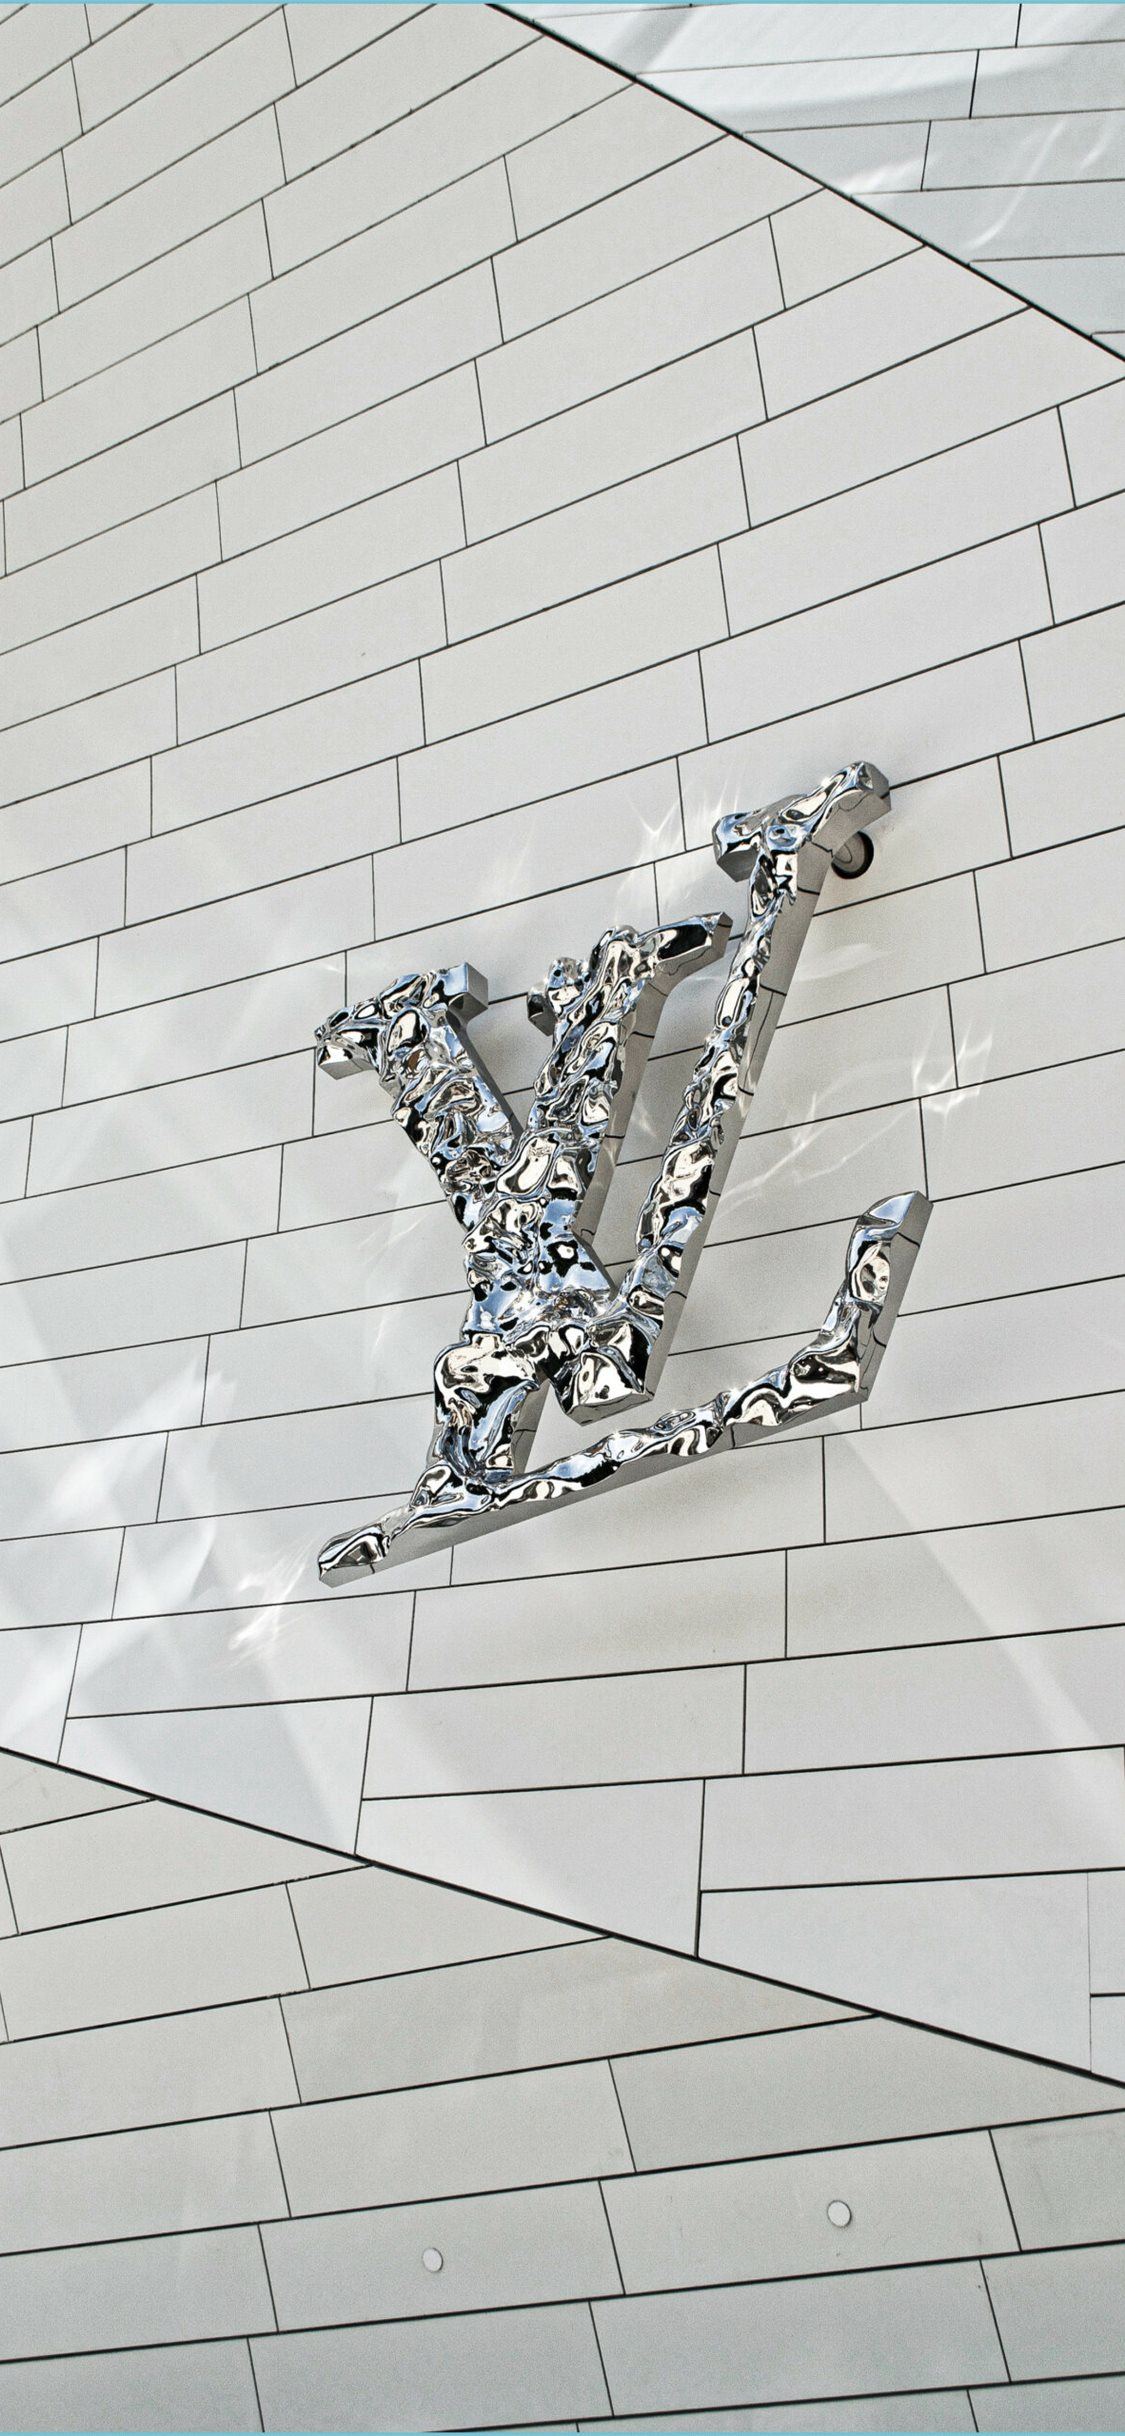 Designspiration — Design Inspiration  Louis vuitton iphone wallpaper,  Black and white picture wall, Black and white photo wall